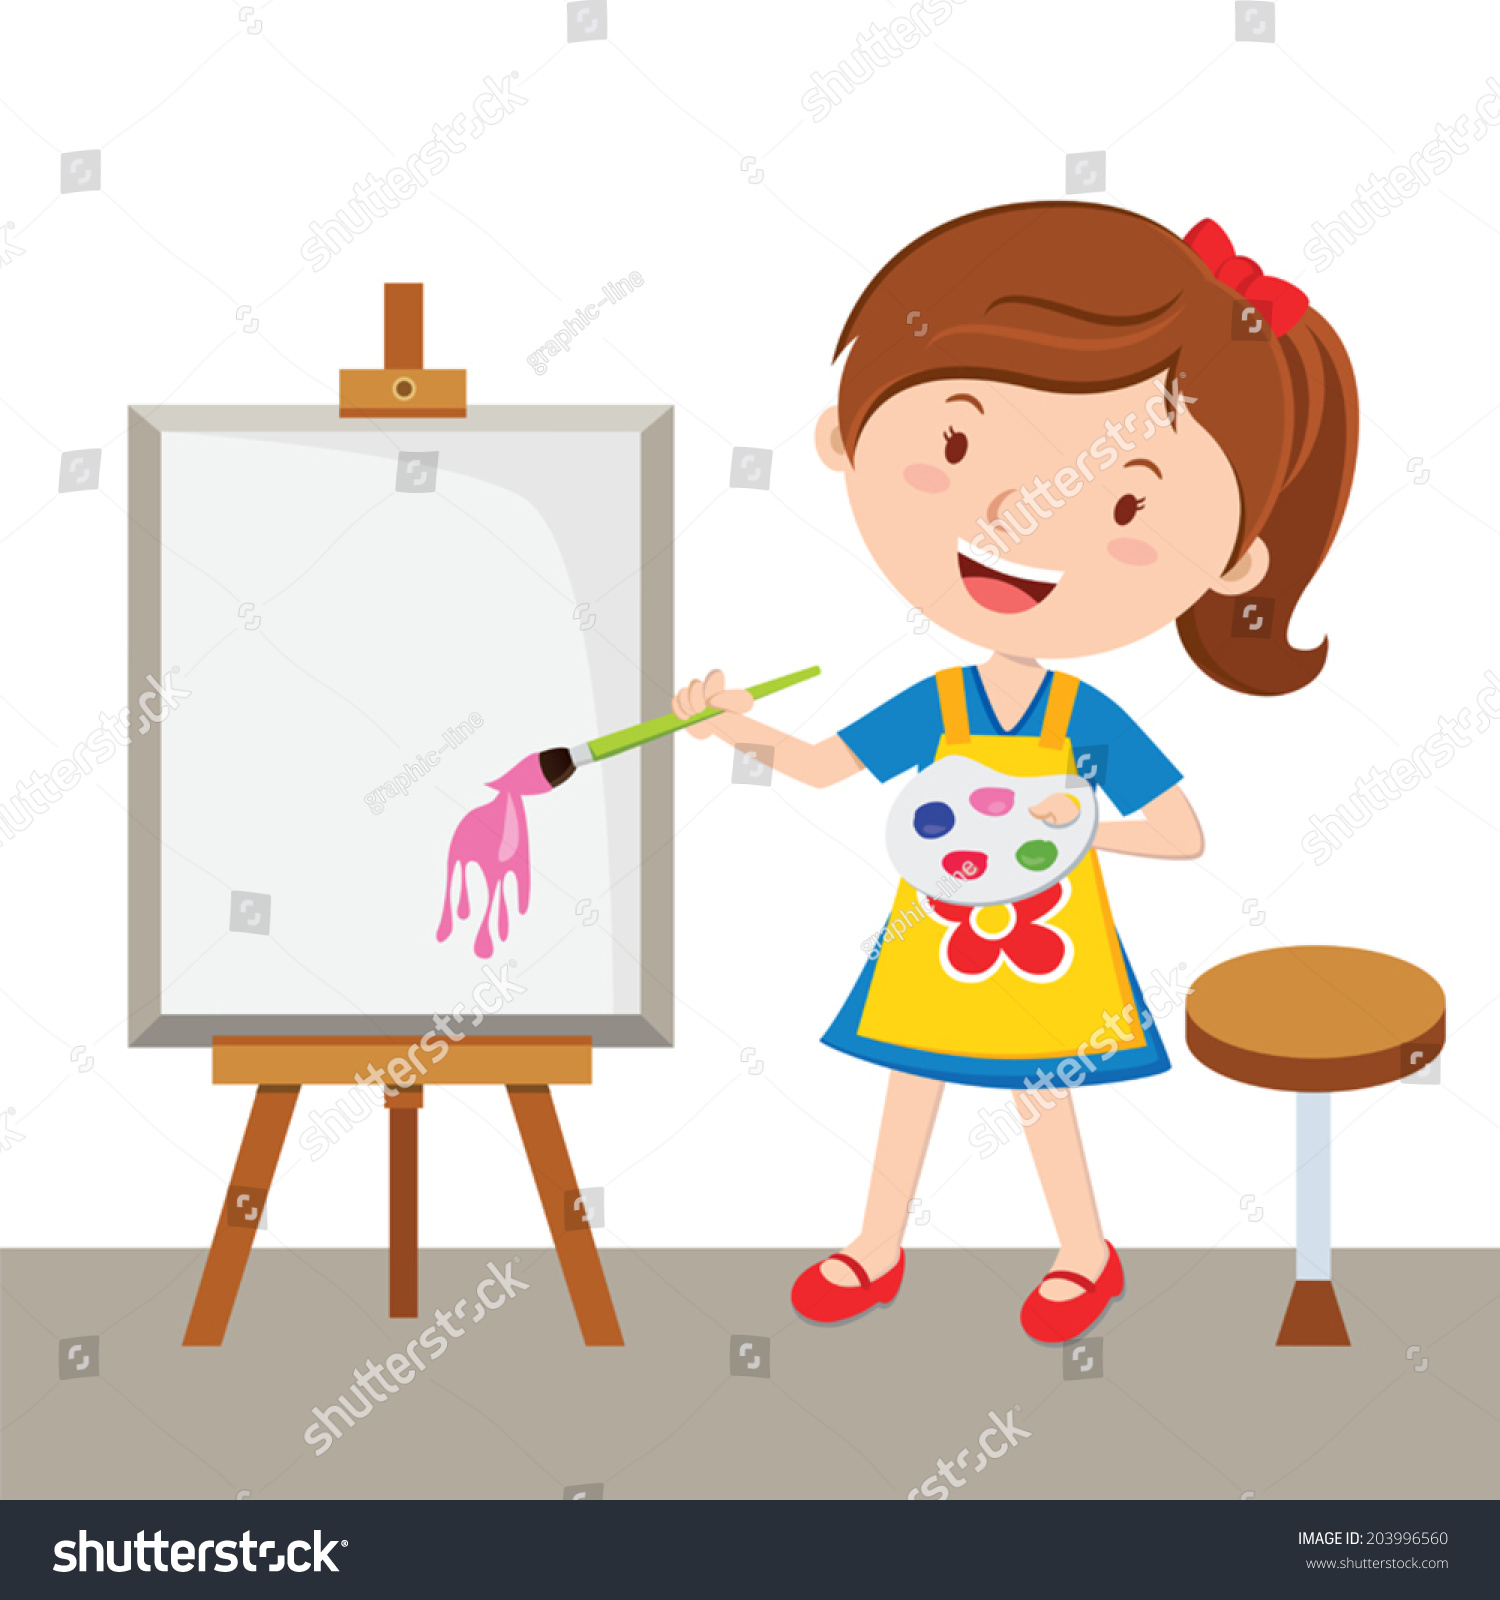 Little Artist. Vector Illustration Of A Little Girl Painting With Color ...